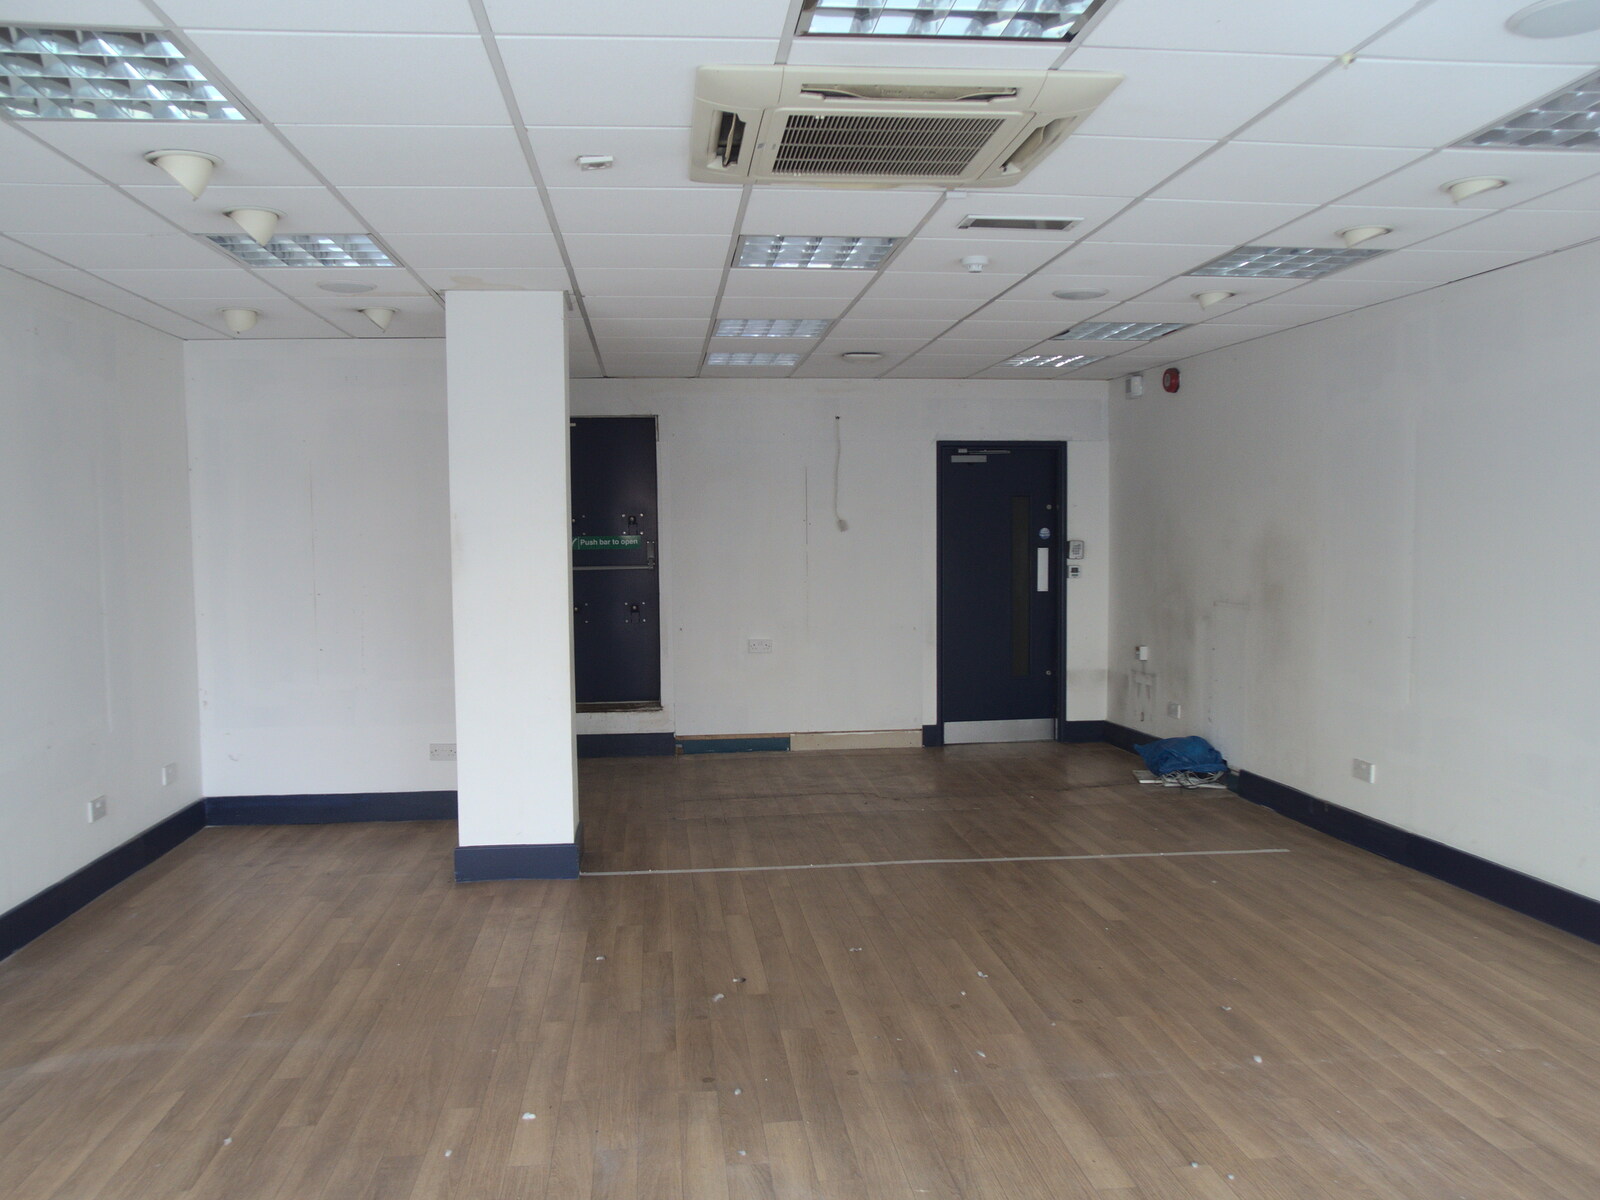 The former Carphone Warehouse is vacant from A Few Hours at the Fair, Fair Green, Diss, Norfolk - 5th September 2021